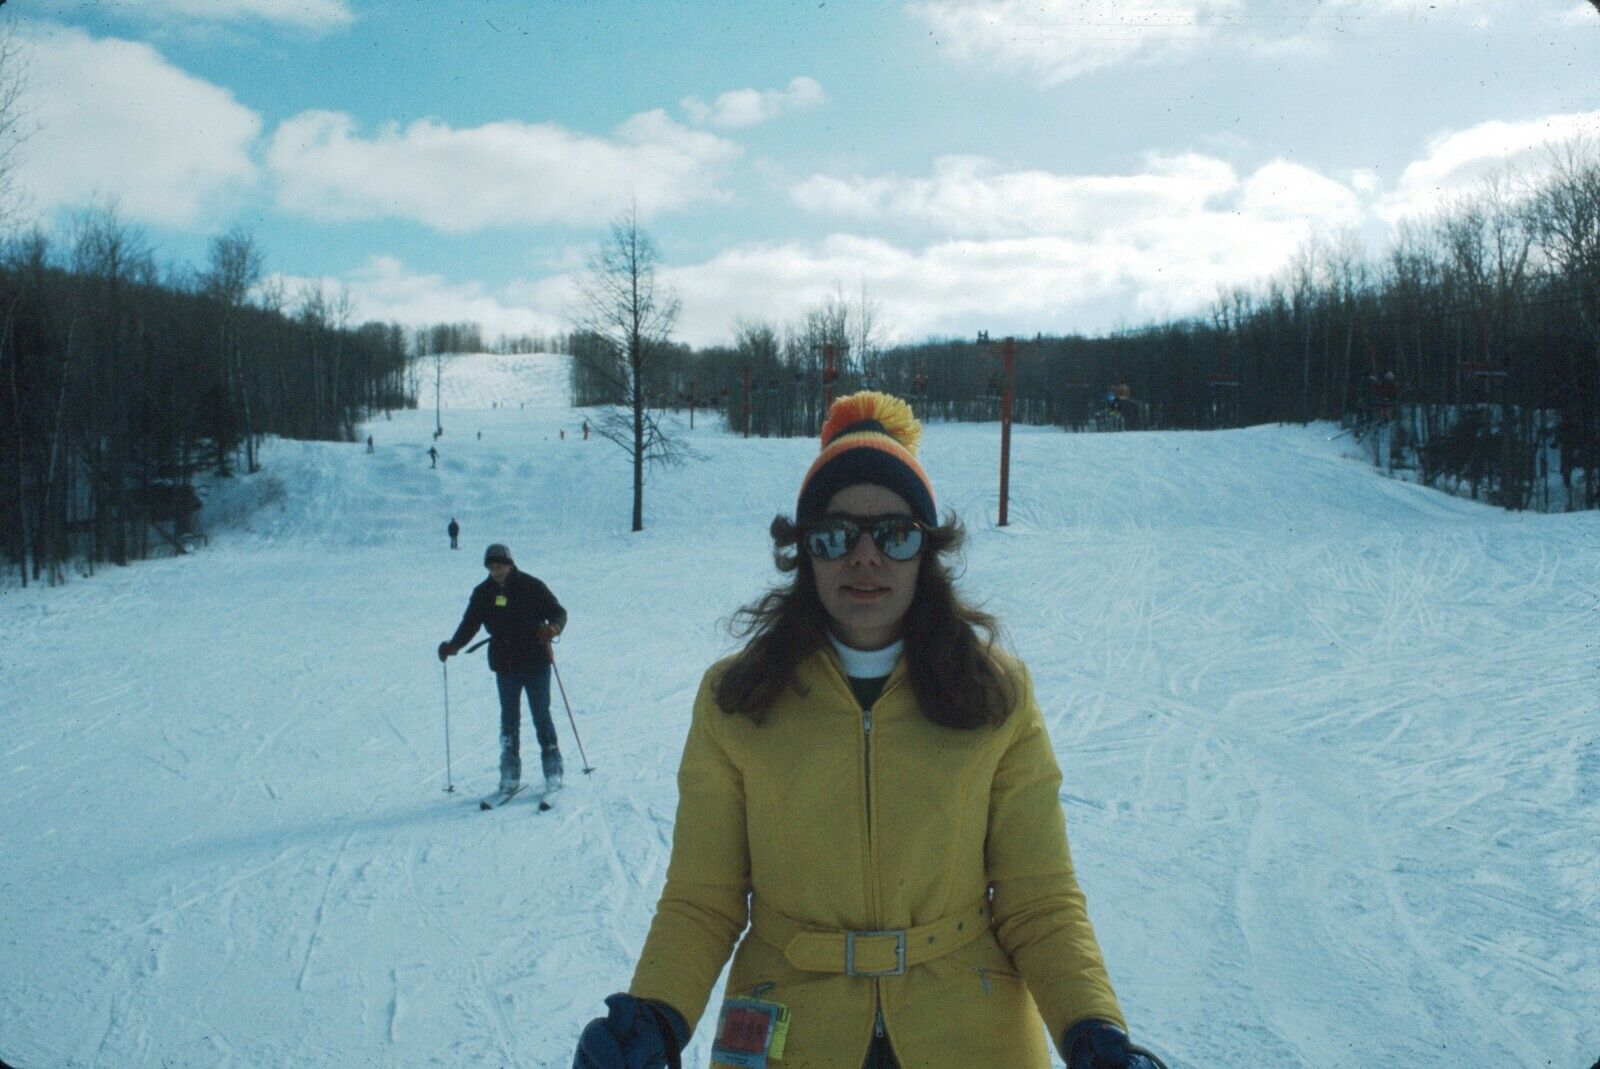 1977 Woman Skiing on Snowy Mountain Bunny Slope 70s Vintage 35mm Slide